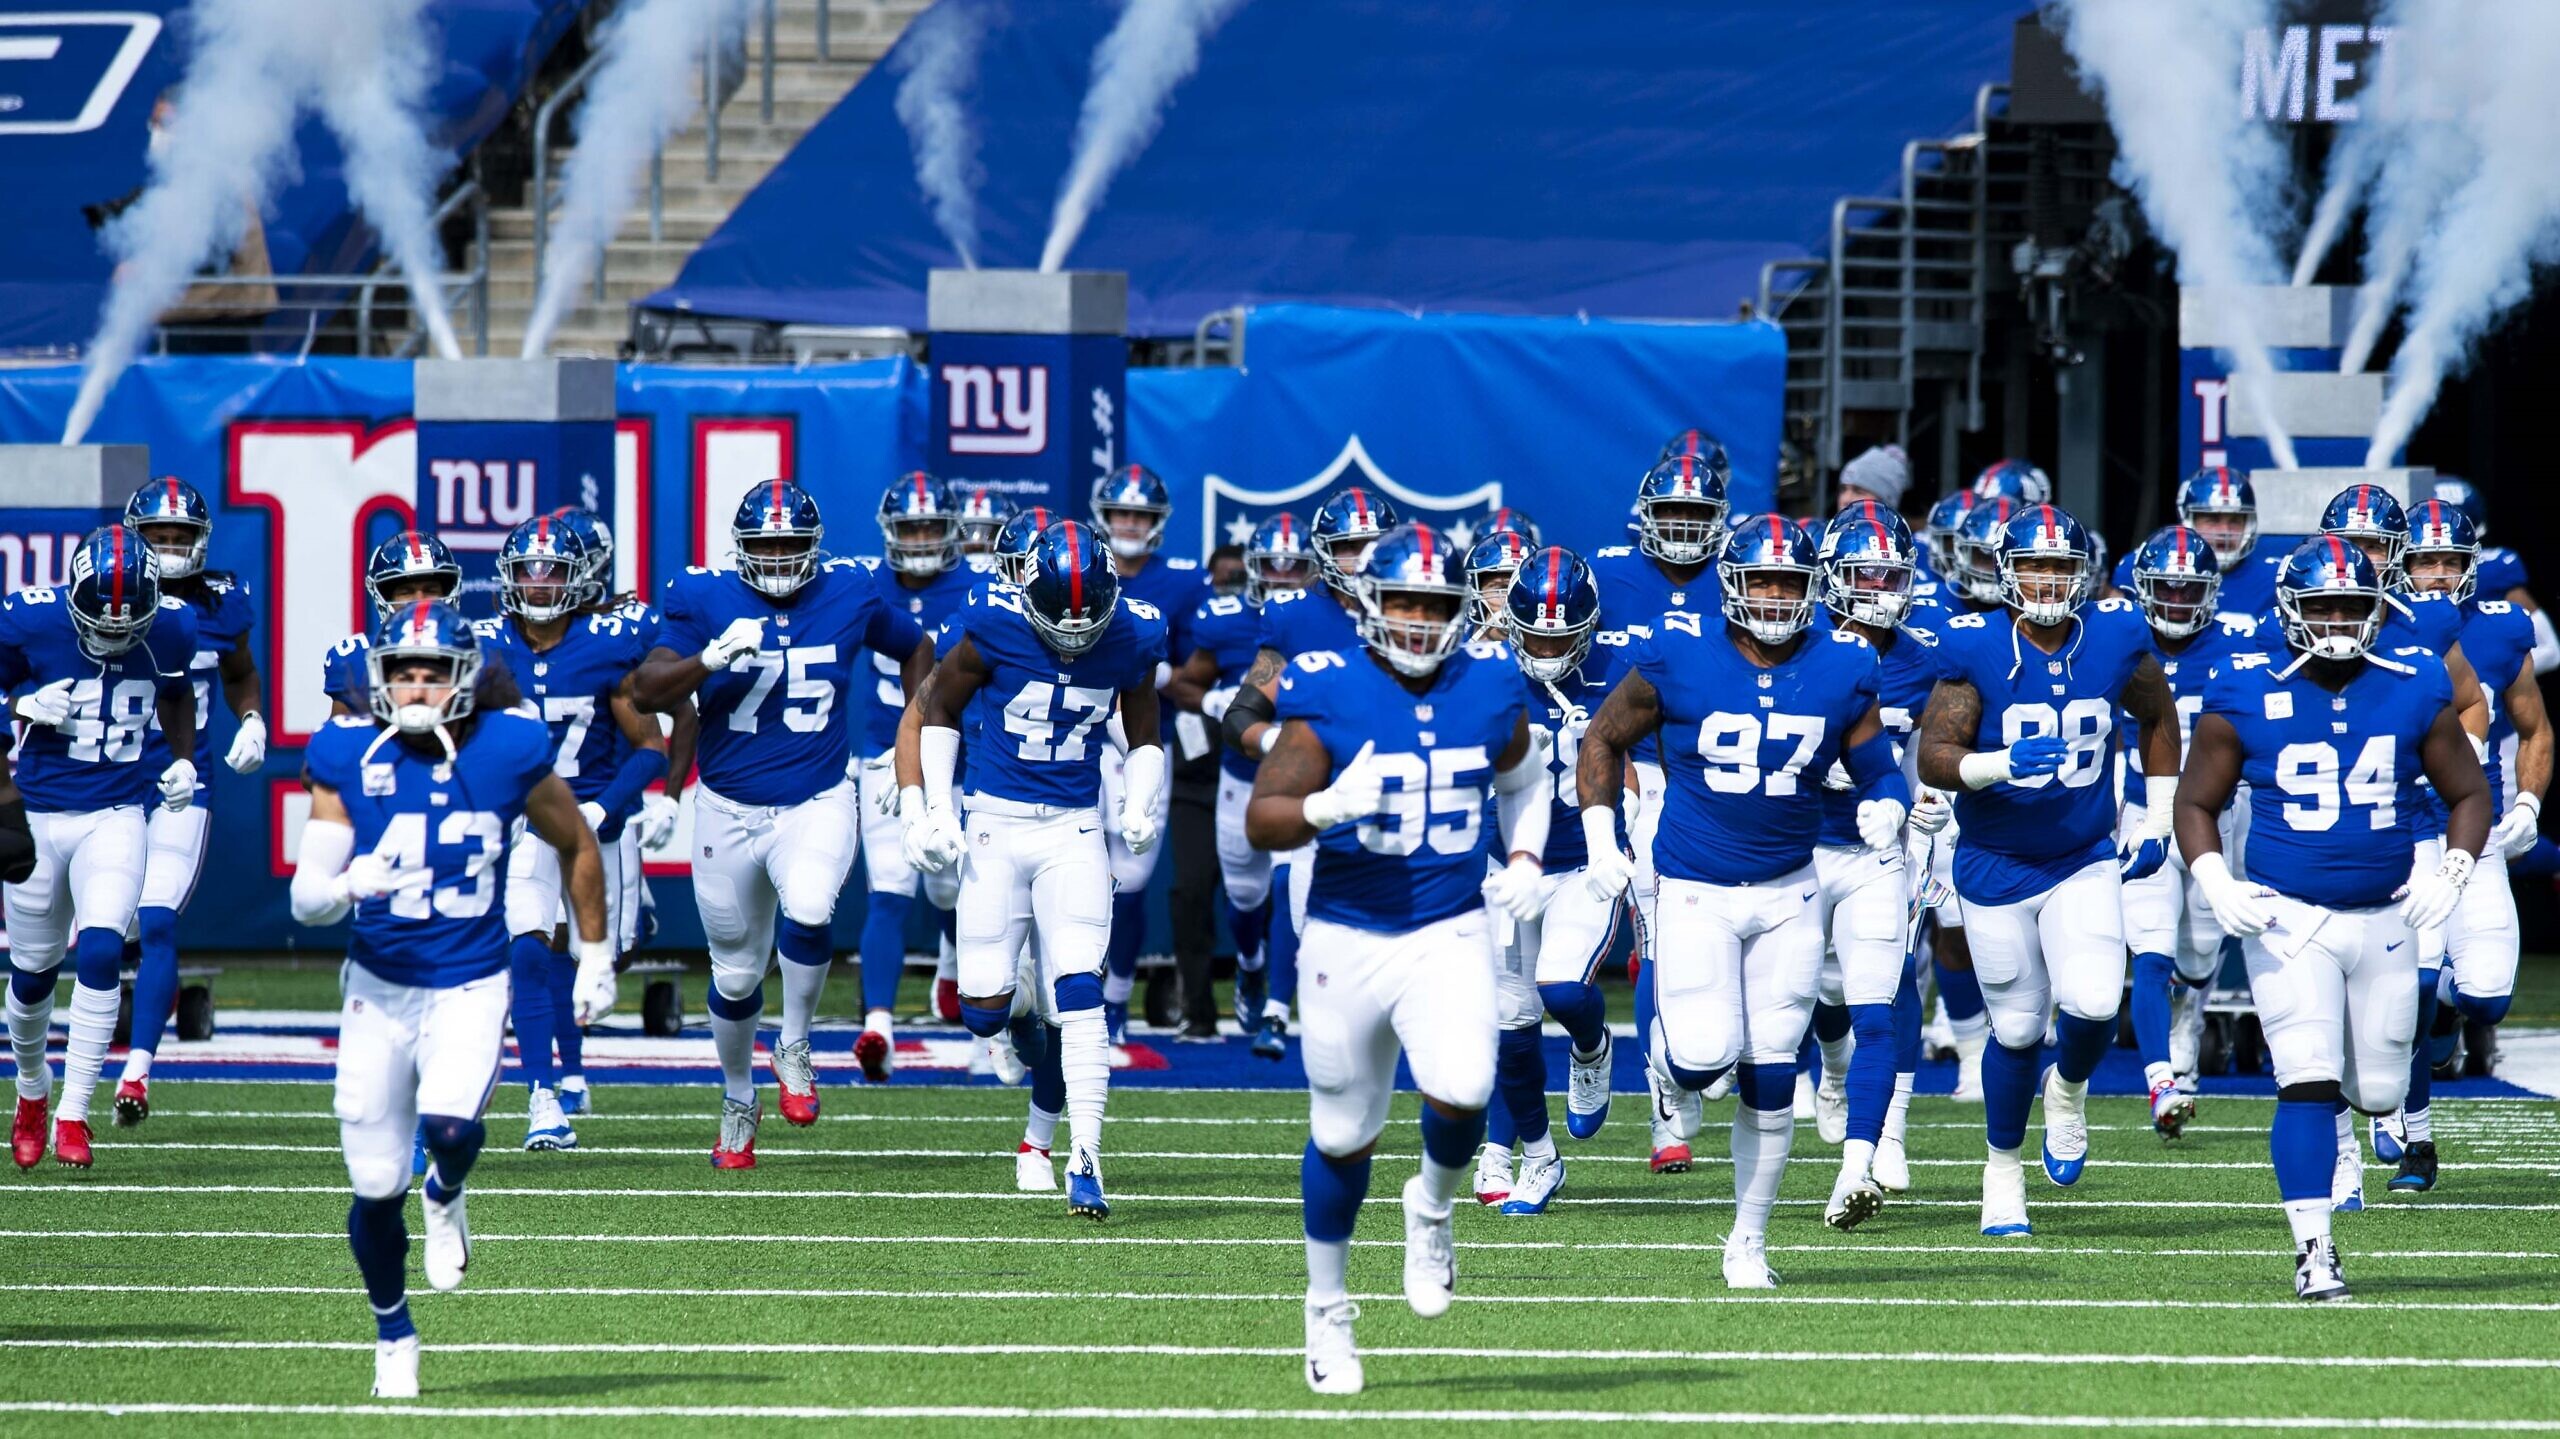 Owner of New York Giants unhappy with football game on Rosh